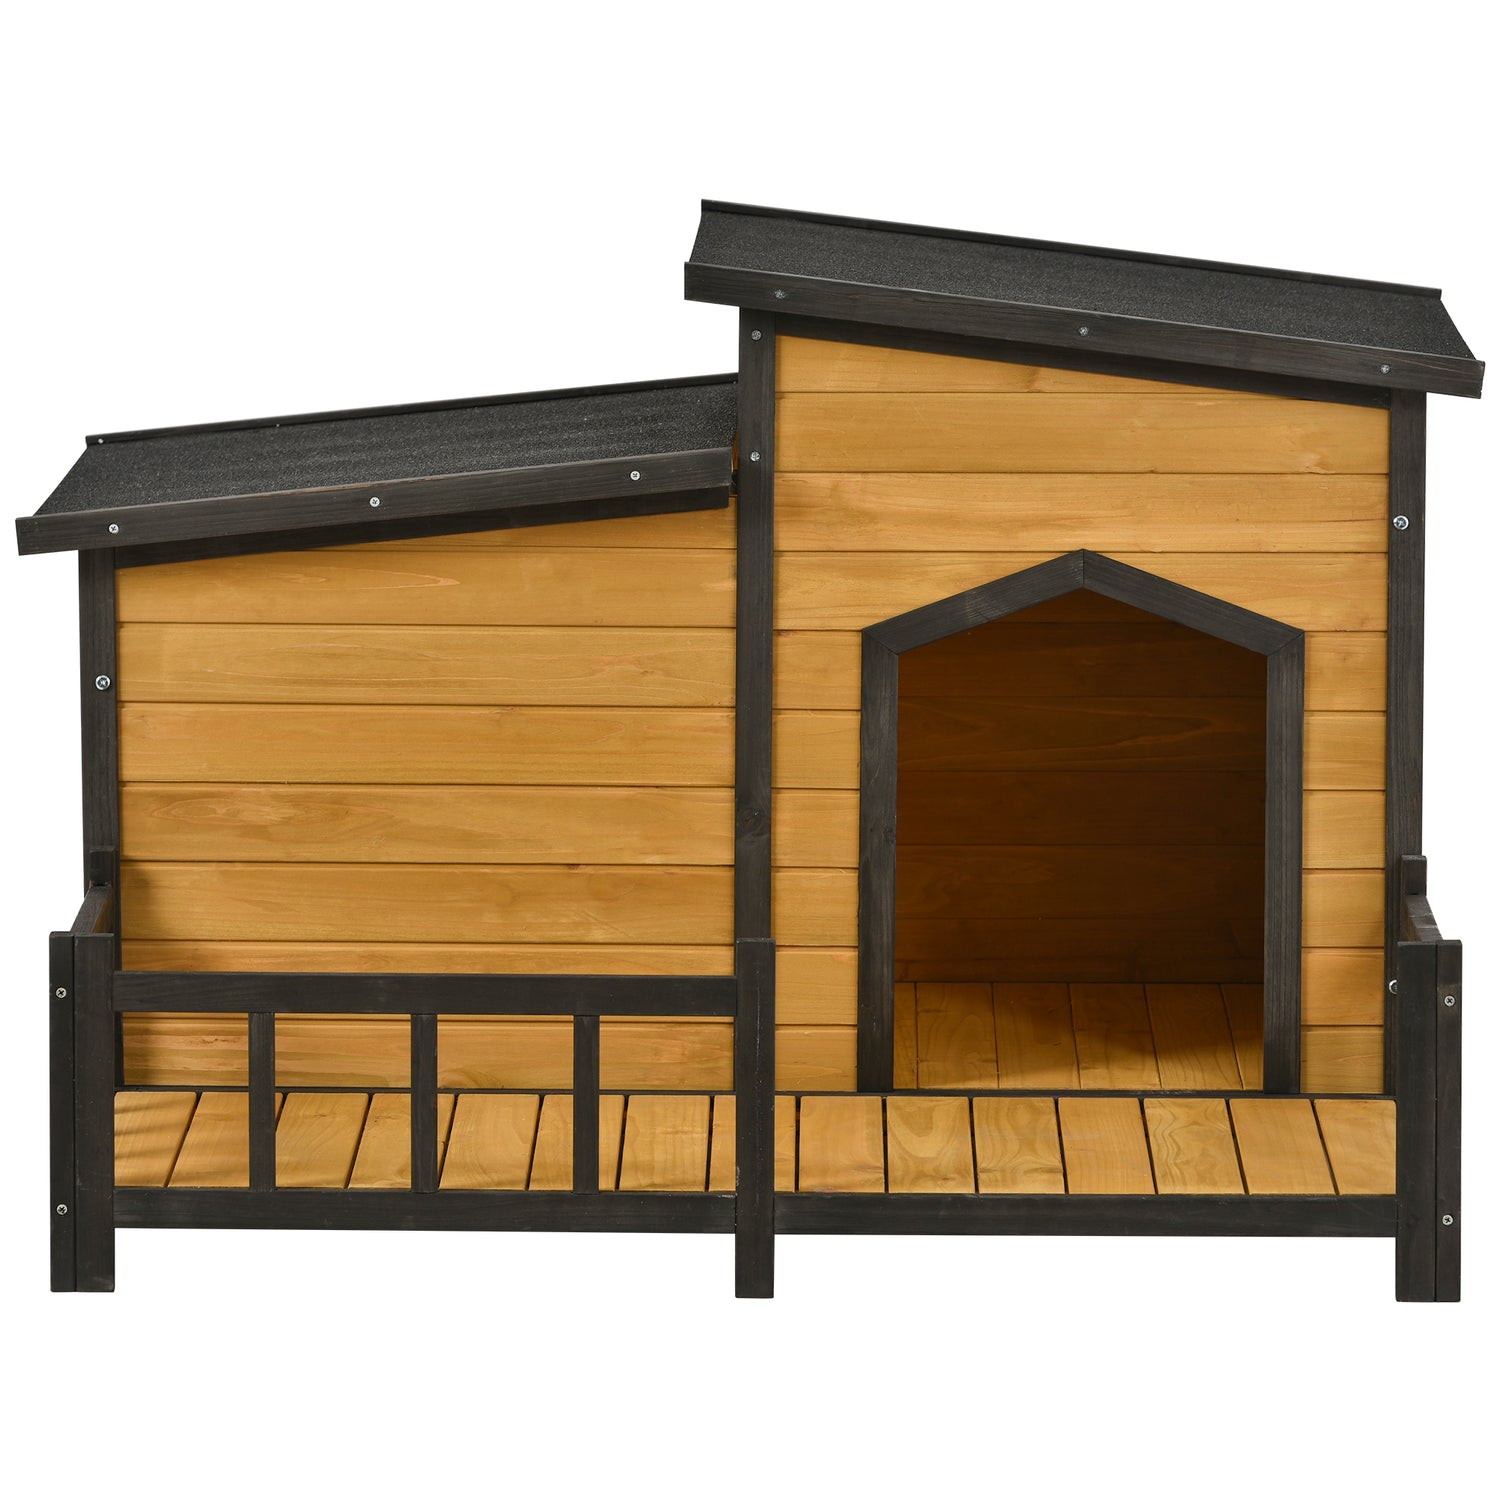 Atotoa 47.2" Large Wooden Dog House Outdoor, Outdoor & Indoor Dog Crate, Cabin Style, with Porch